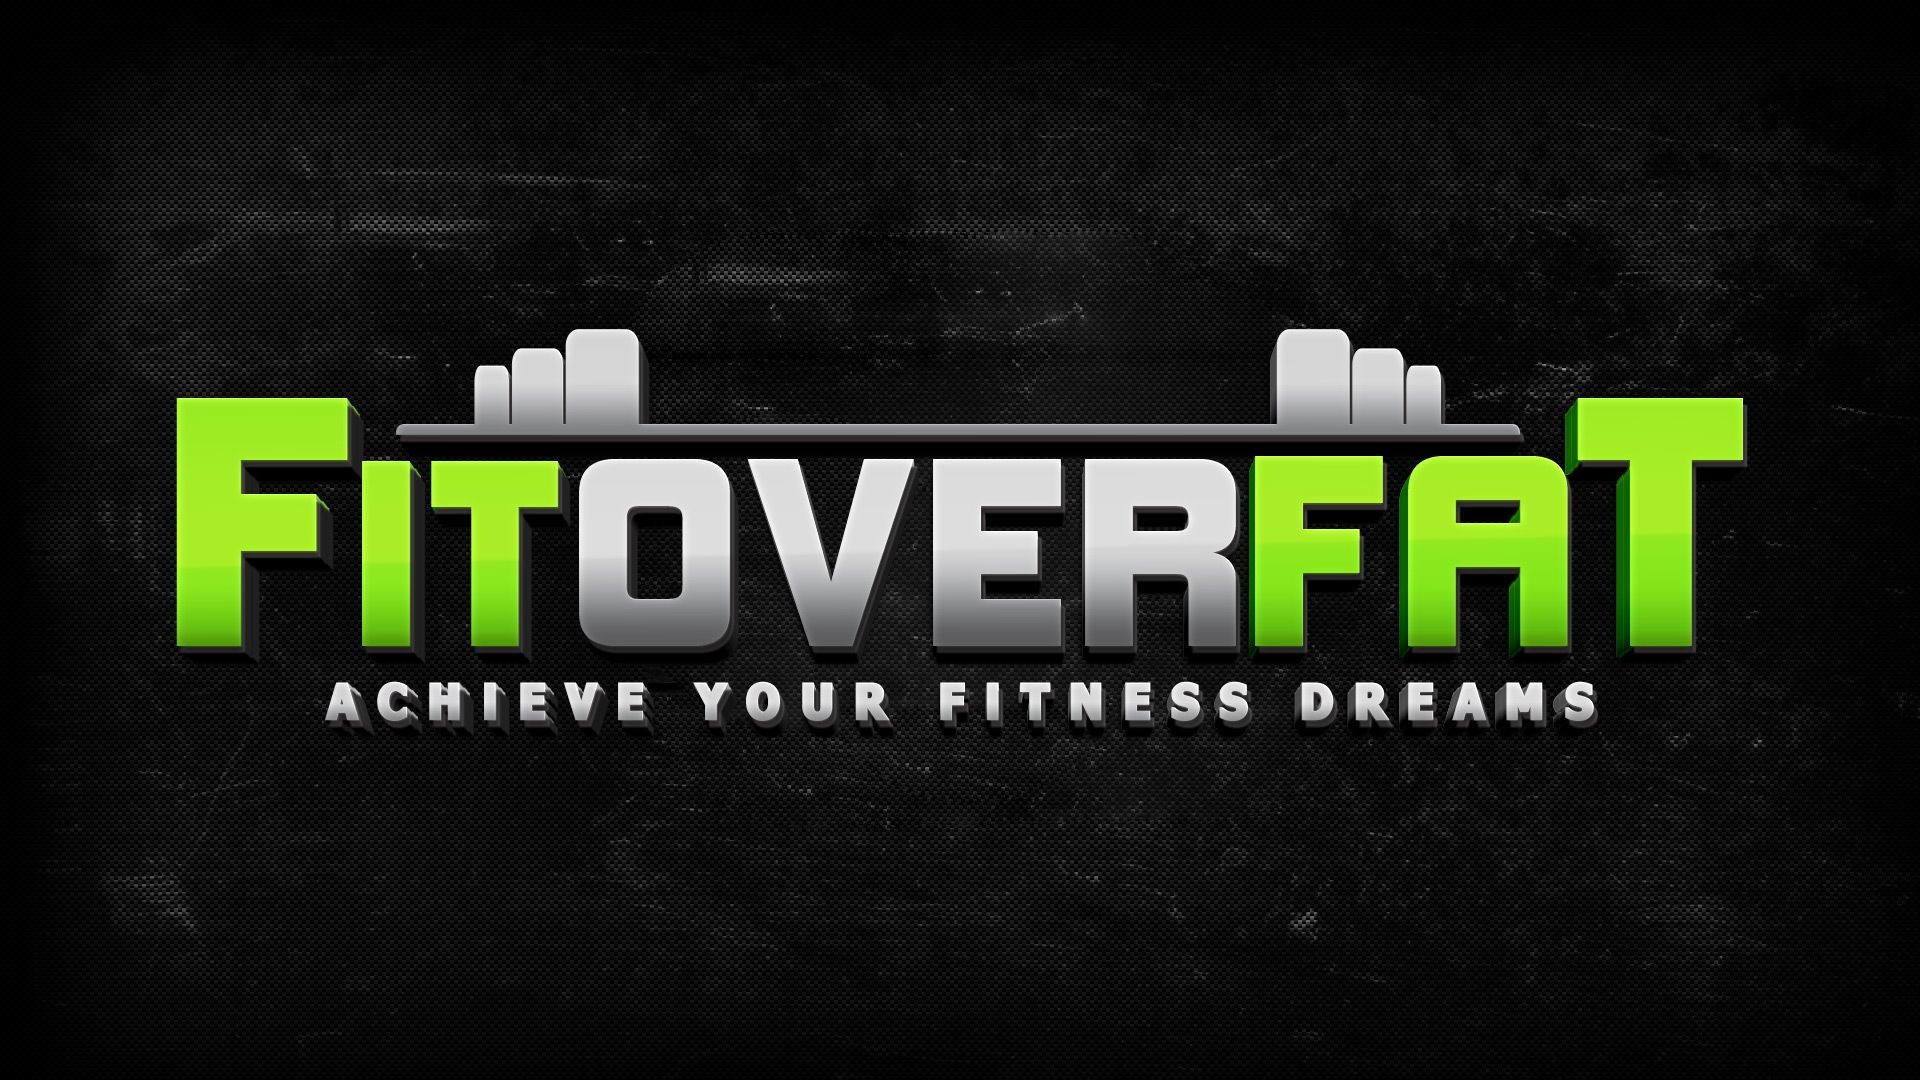 1920x1080 Fitness Motivational Wallpapers | ... FitOverFat by setting your desktop  wallpaper to this sick background